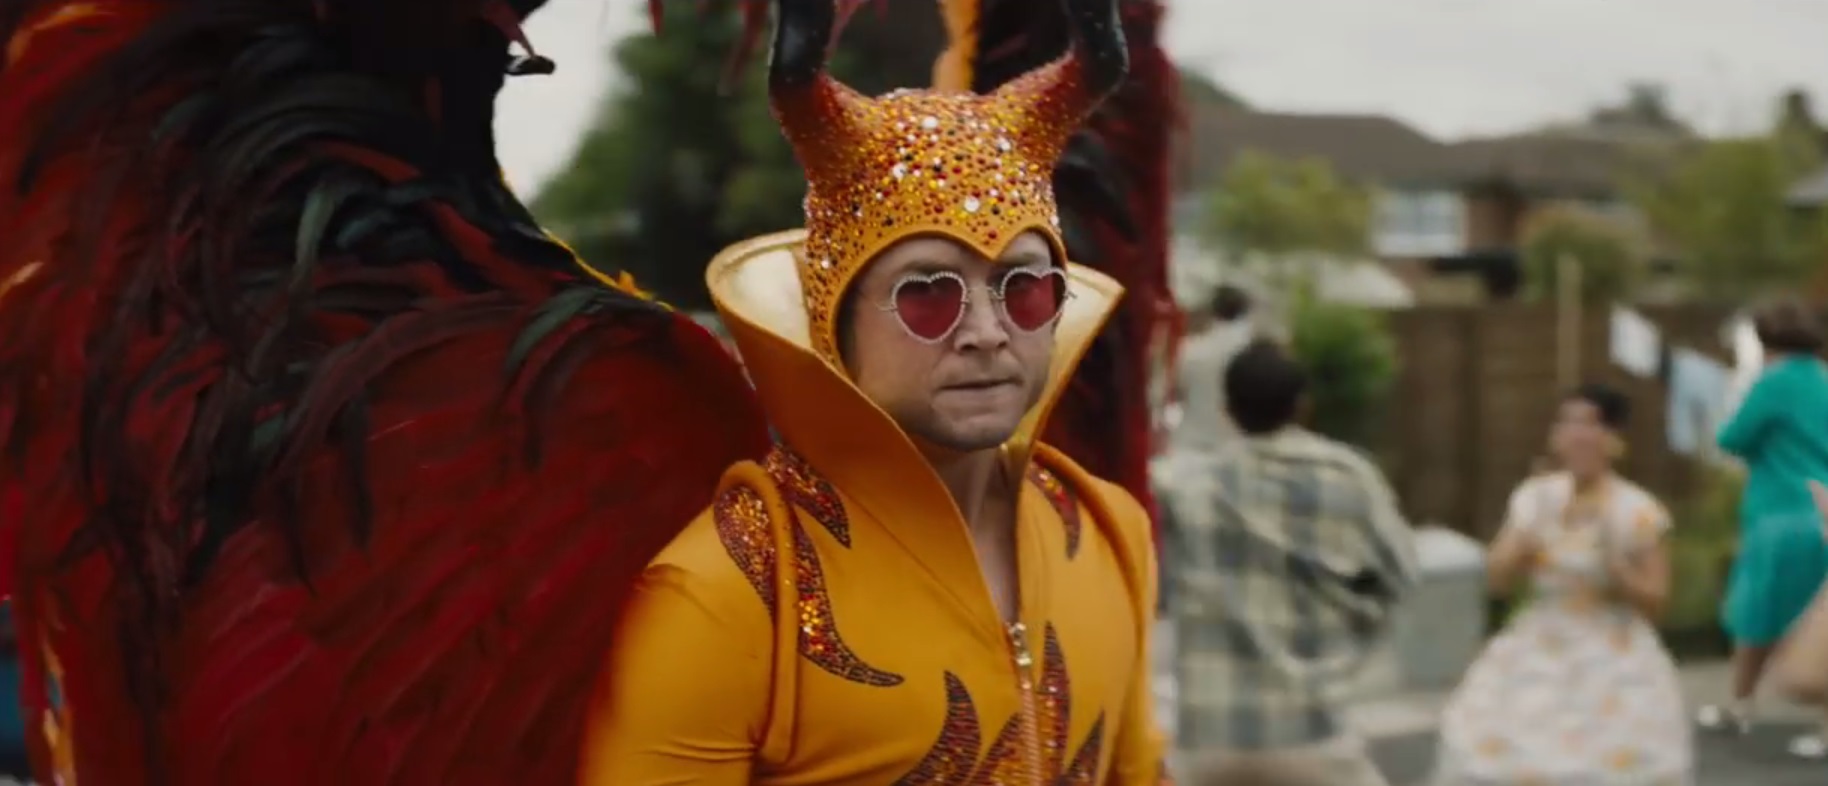 The Trailer Is Here For Elton John Film Rocketman And It Looks Wild Pinknews